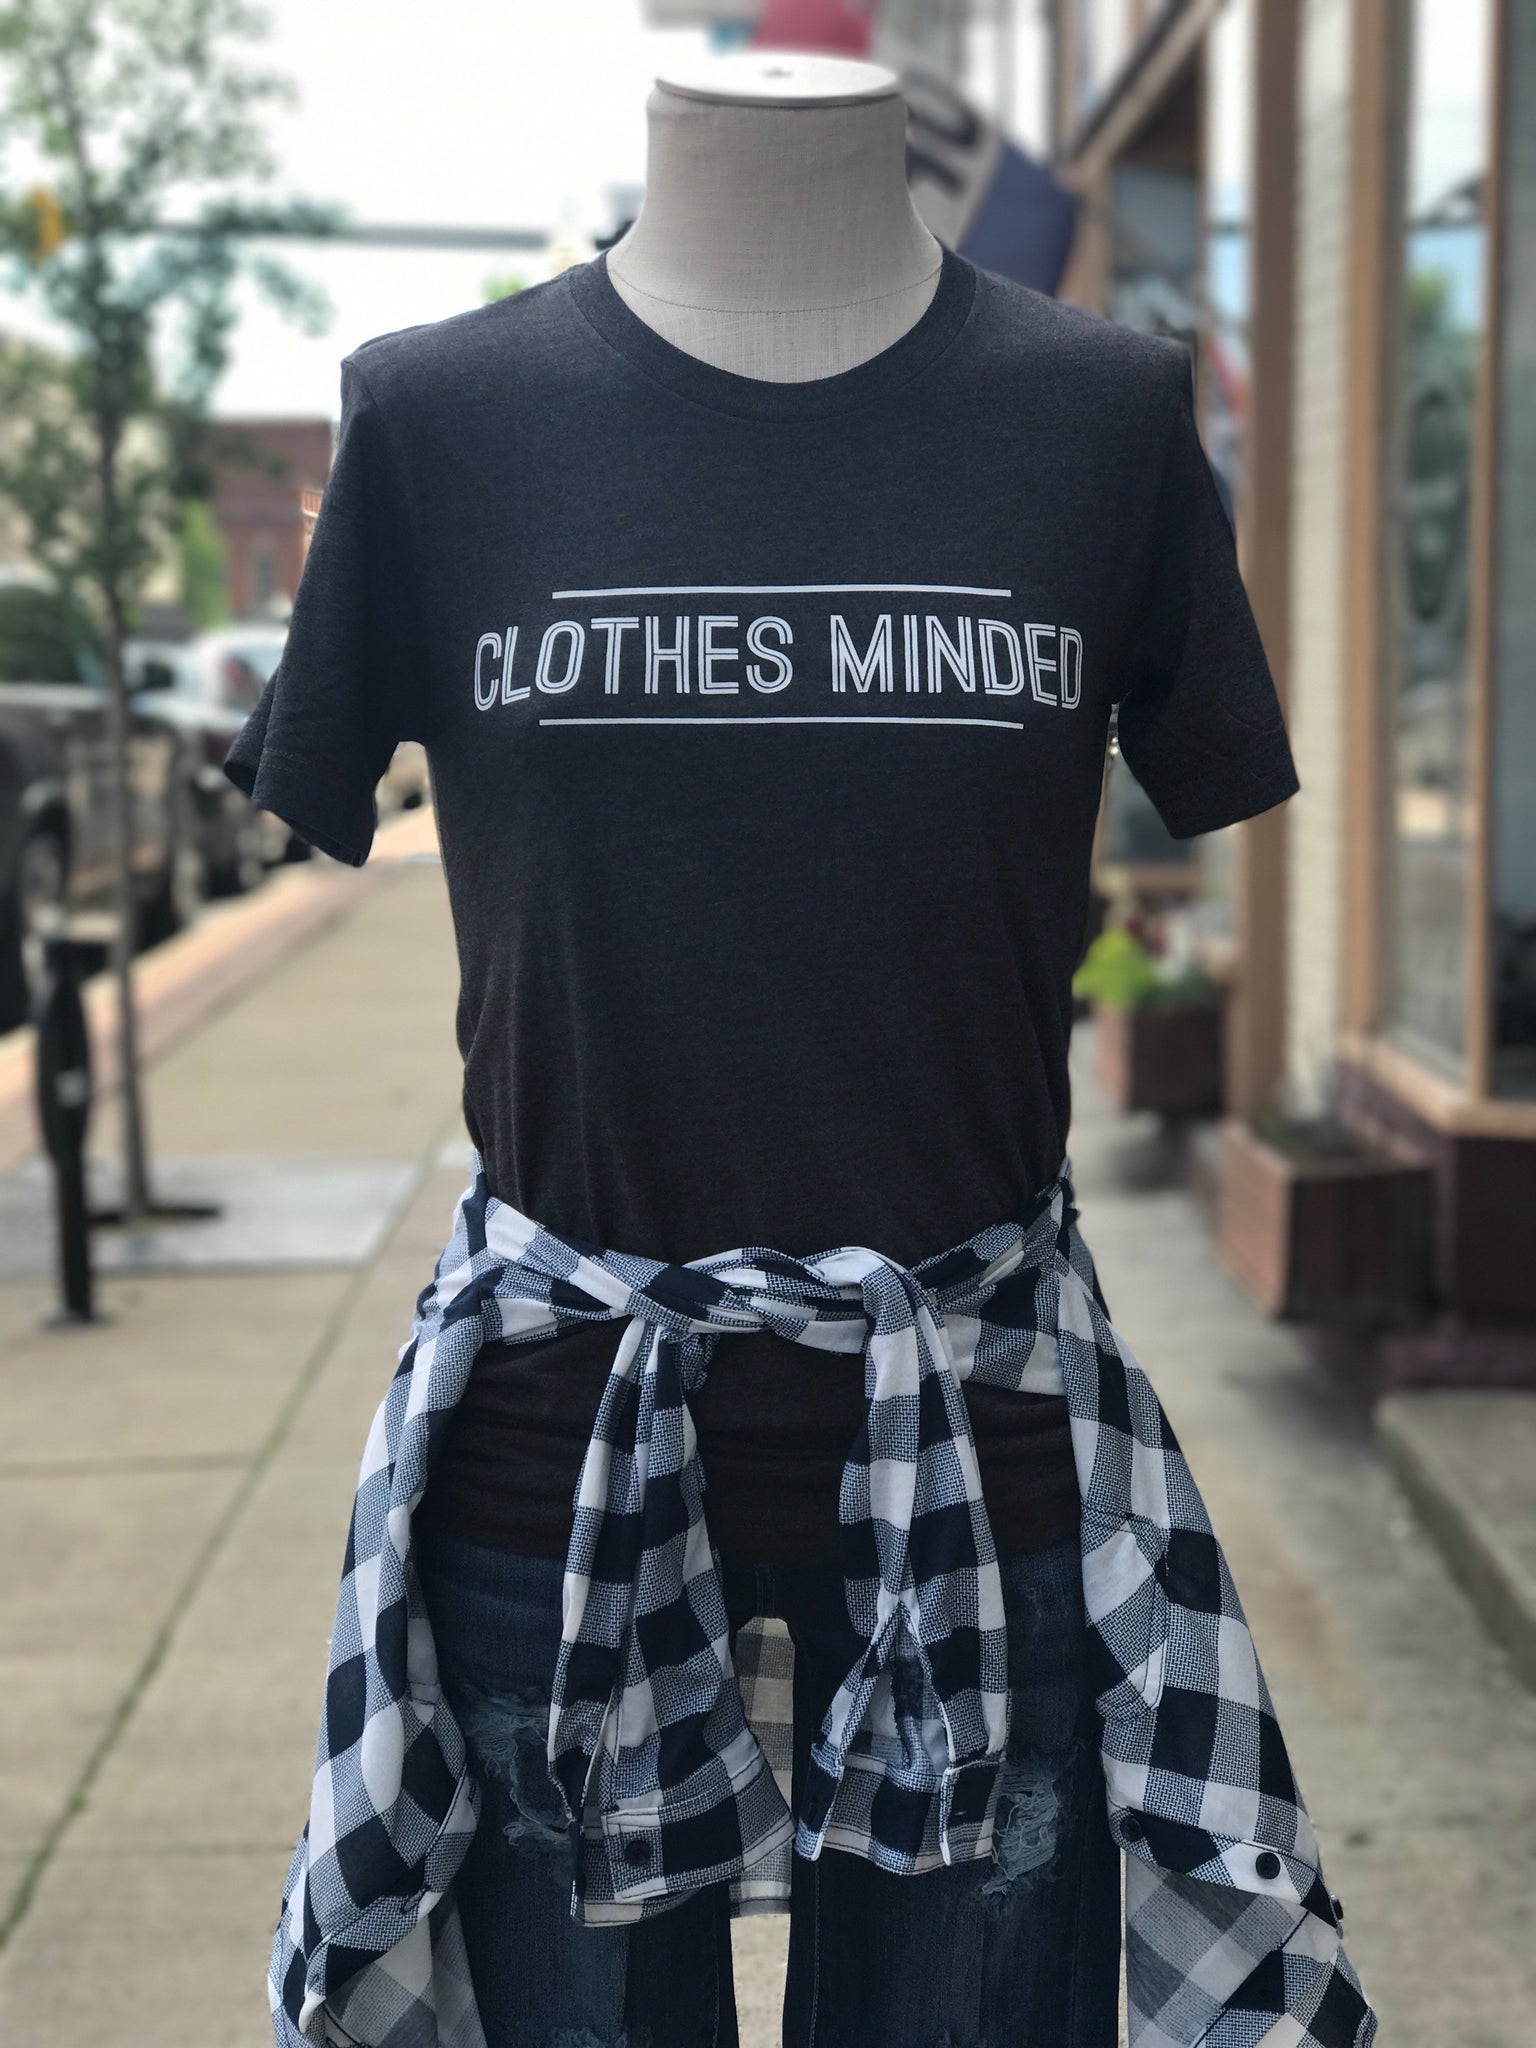 "Clothes Minded" graphic tee